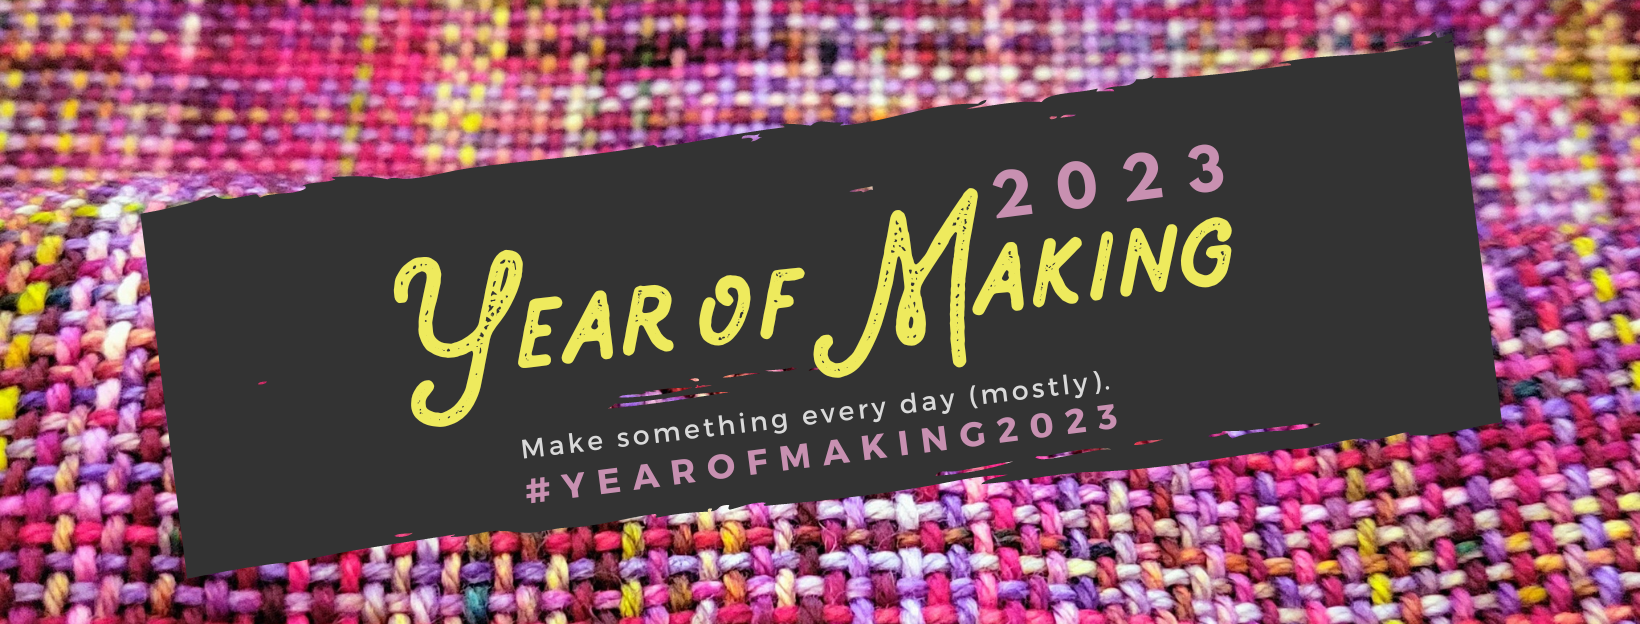 Against a woven fabric photo, a black swath on which is written "Year of Making 2023."